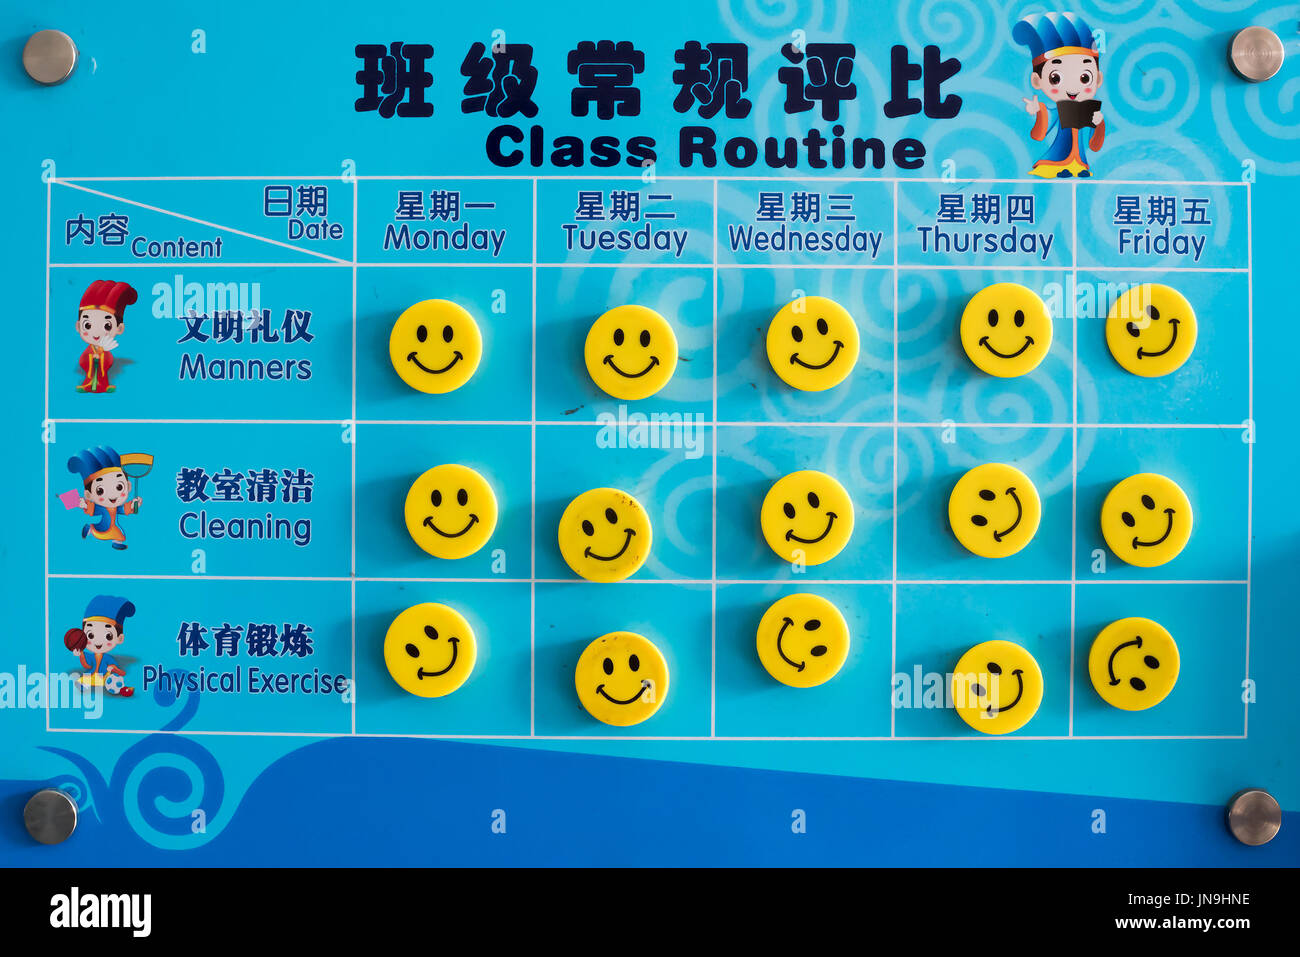 Class routine board in a chinese elementary school Stock Photo